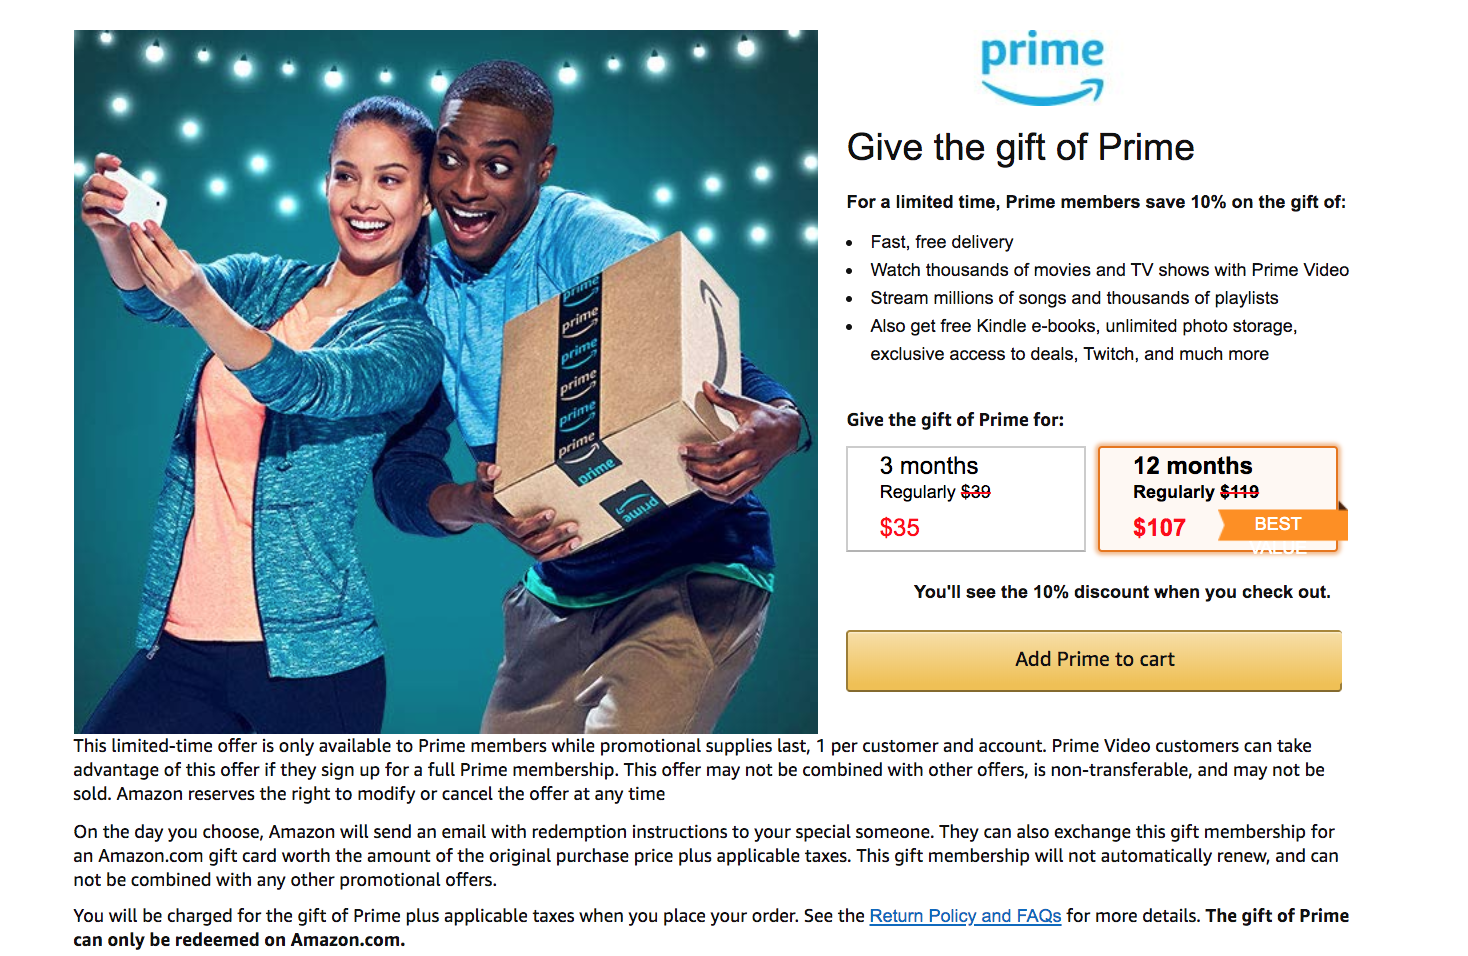 discount amazon prime membership with 10% off